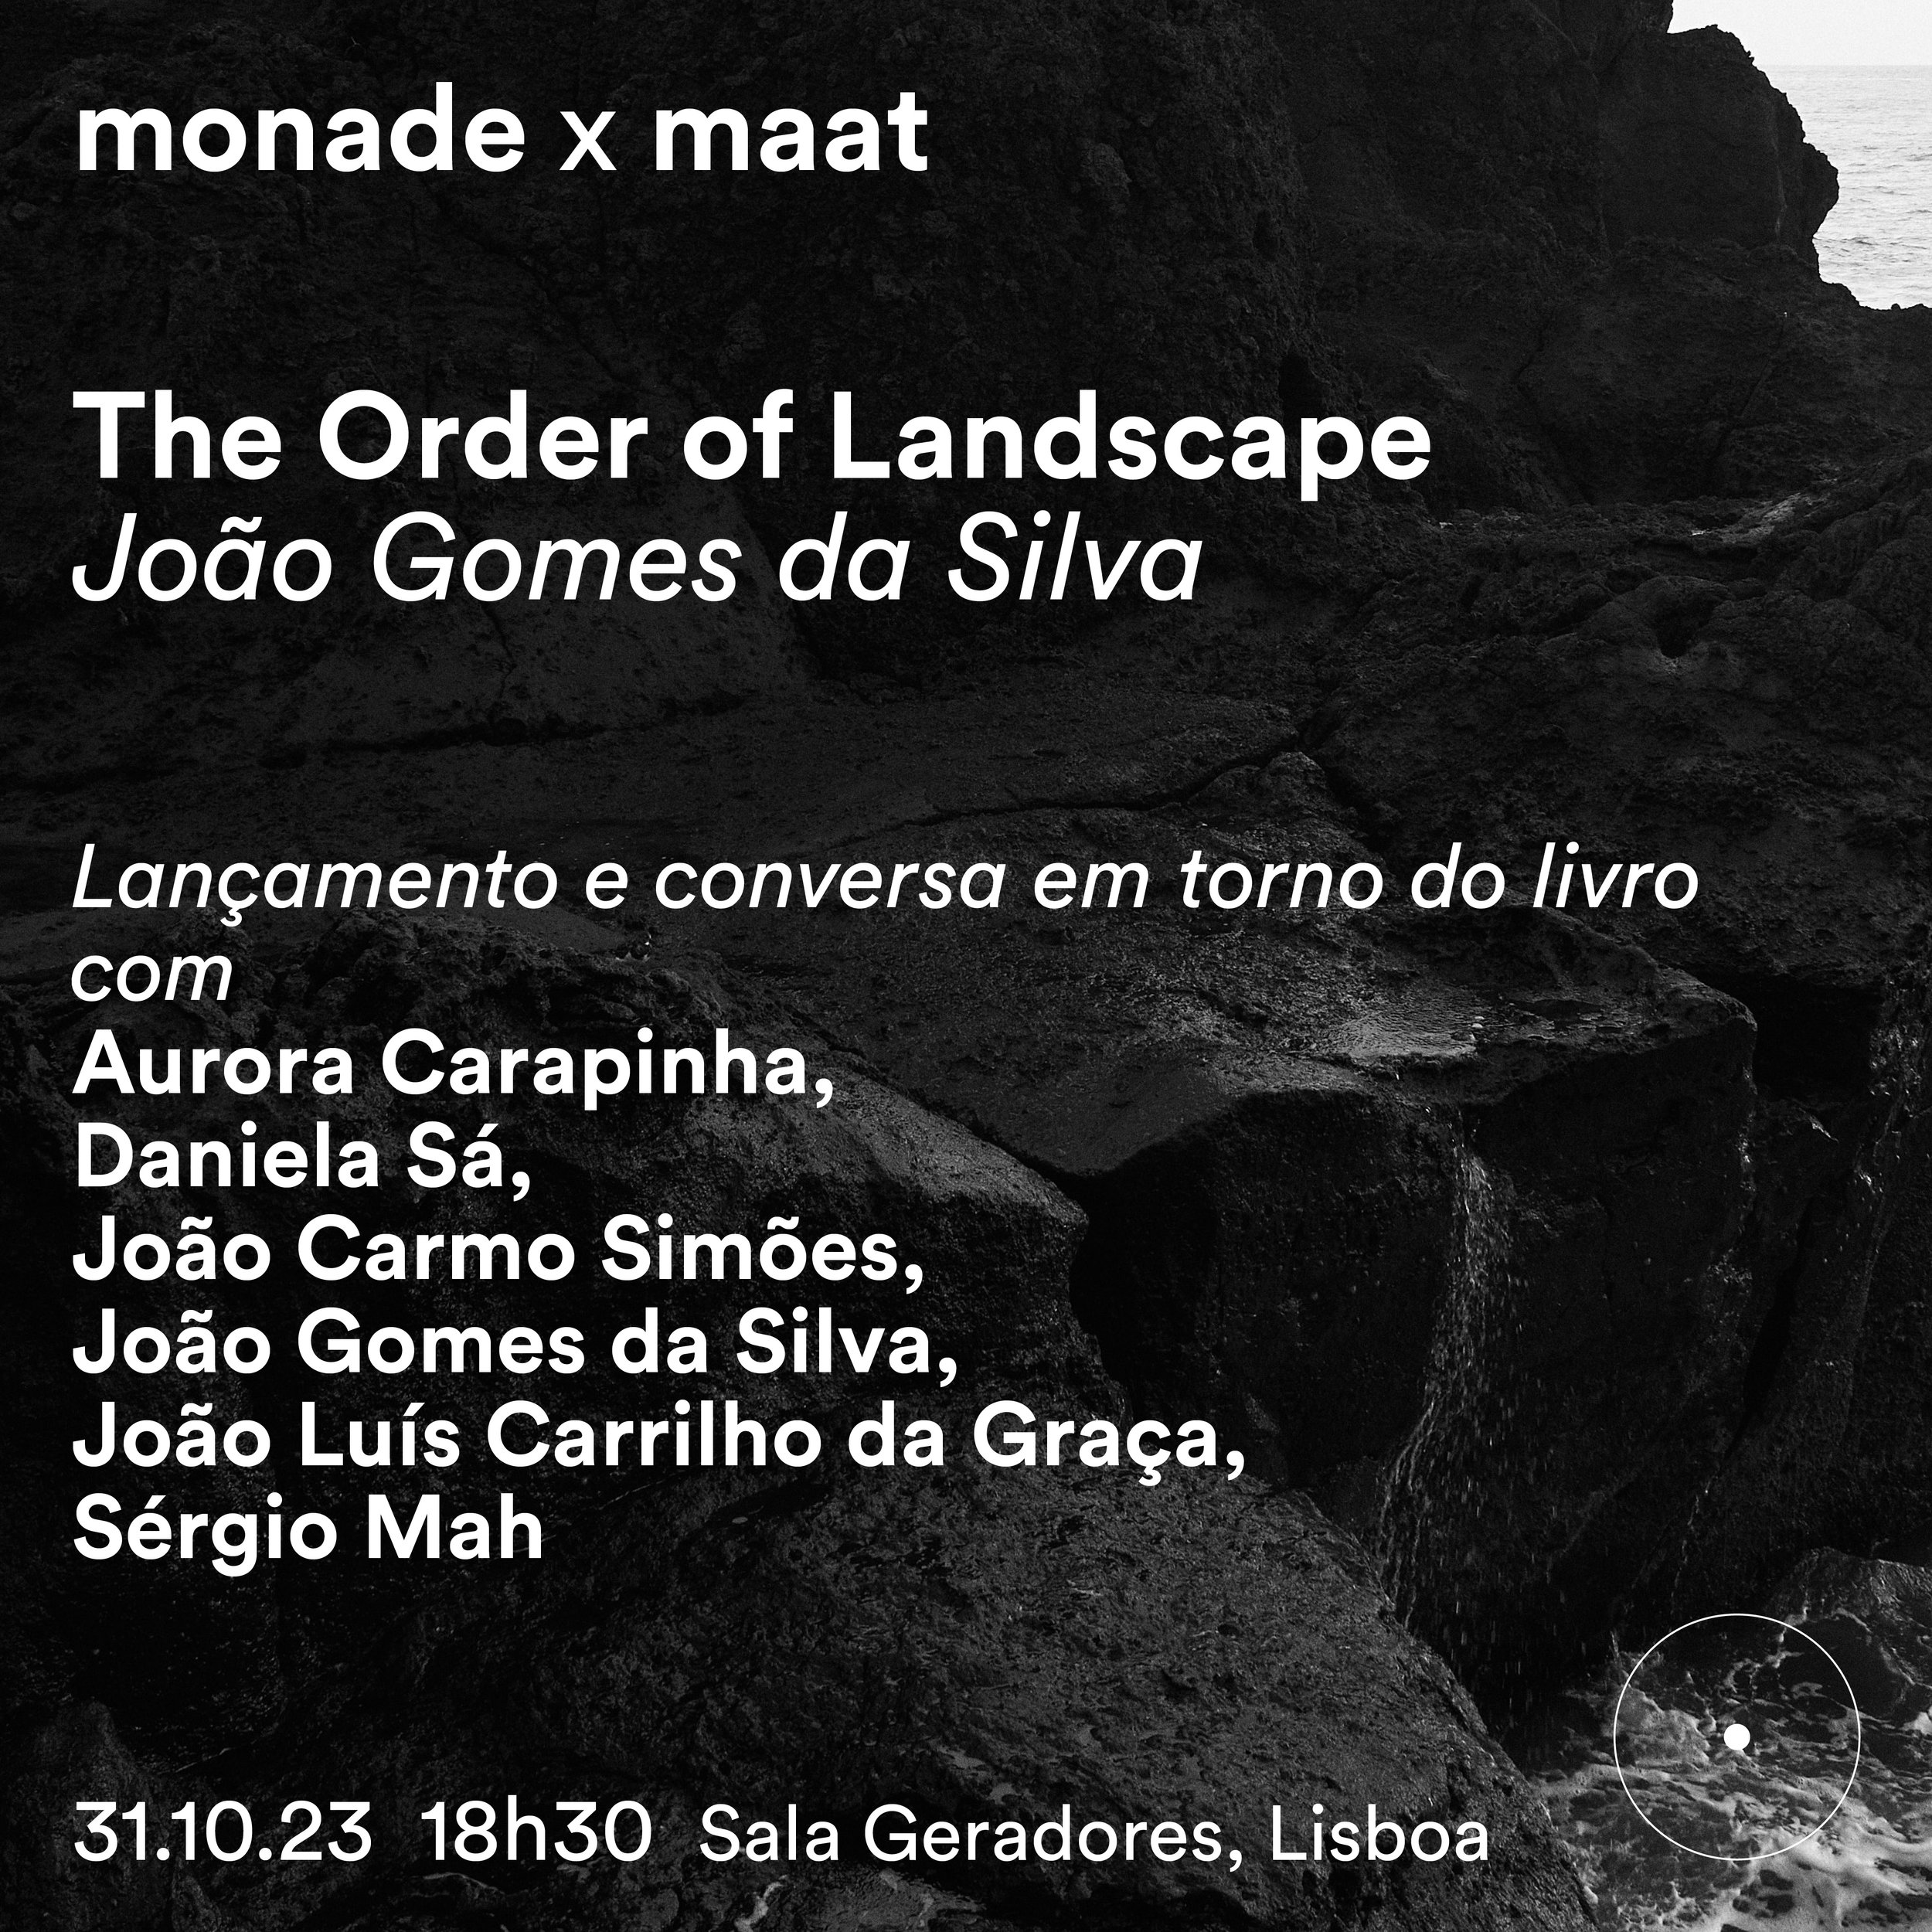 Lançamento 31 Out_maat_The Order of Landscape.jpg